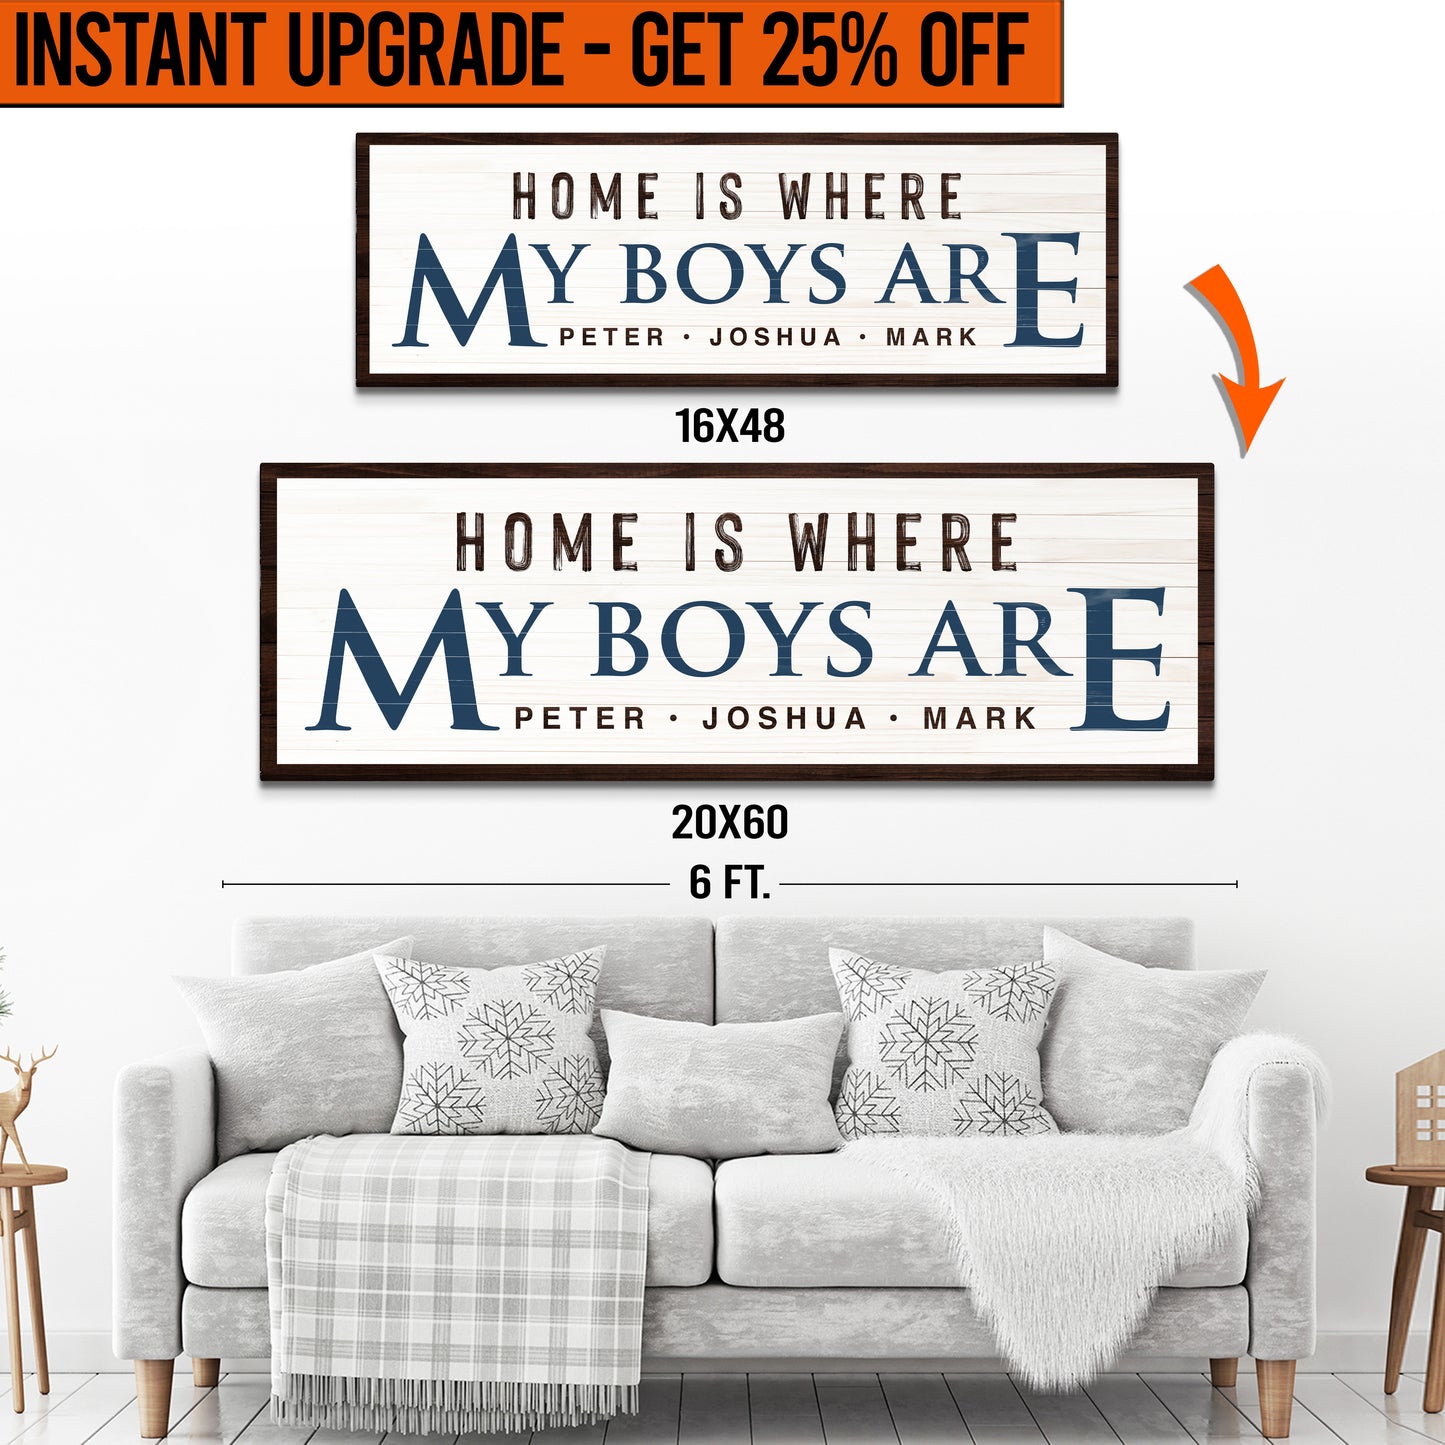 Upgrade Your 16x48 Inches 'HOME IS WHERE MY BOYS ARE' (Style 2) Canvas To 20x60 Inches